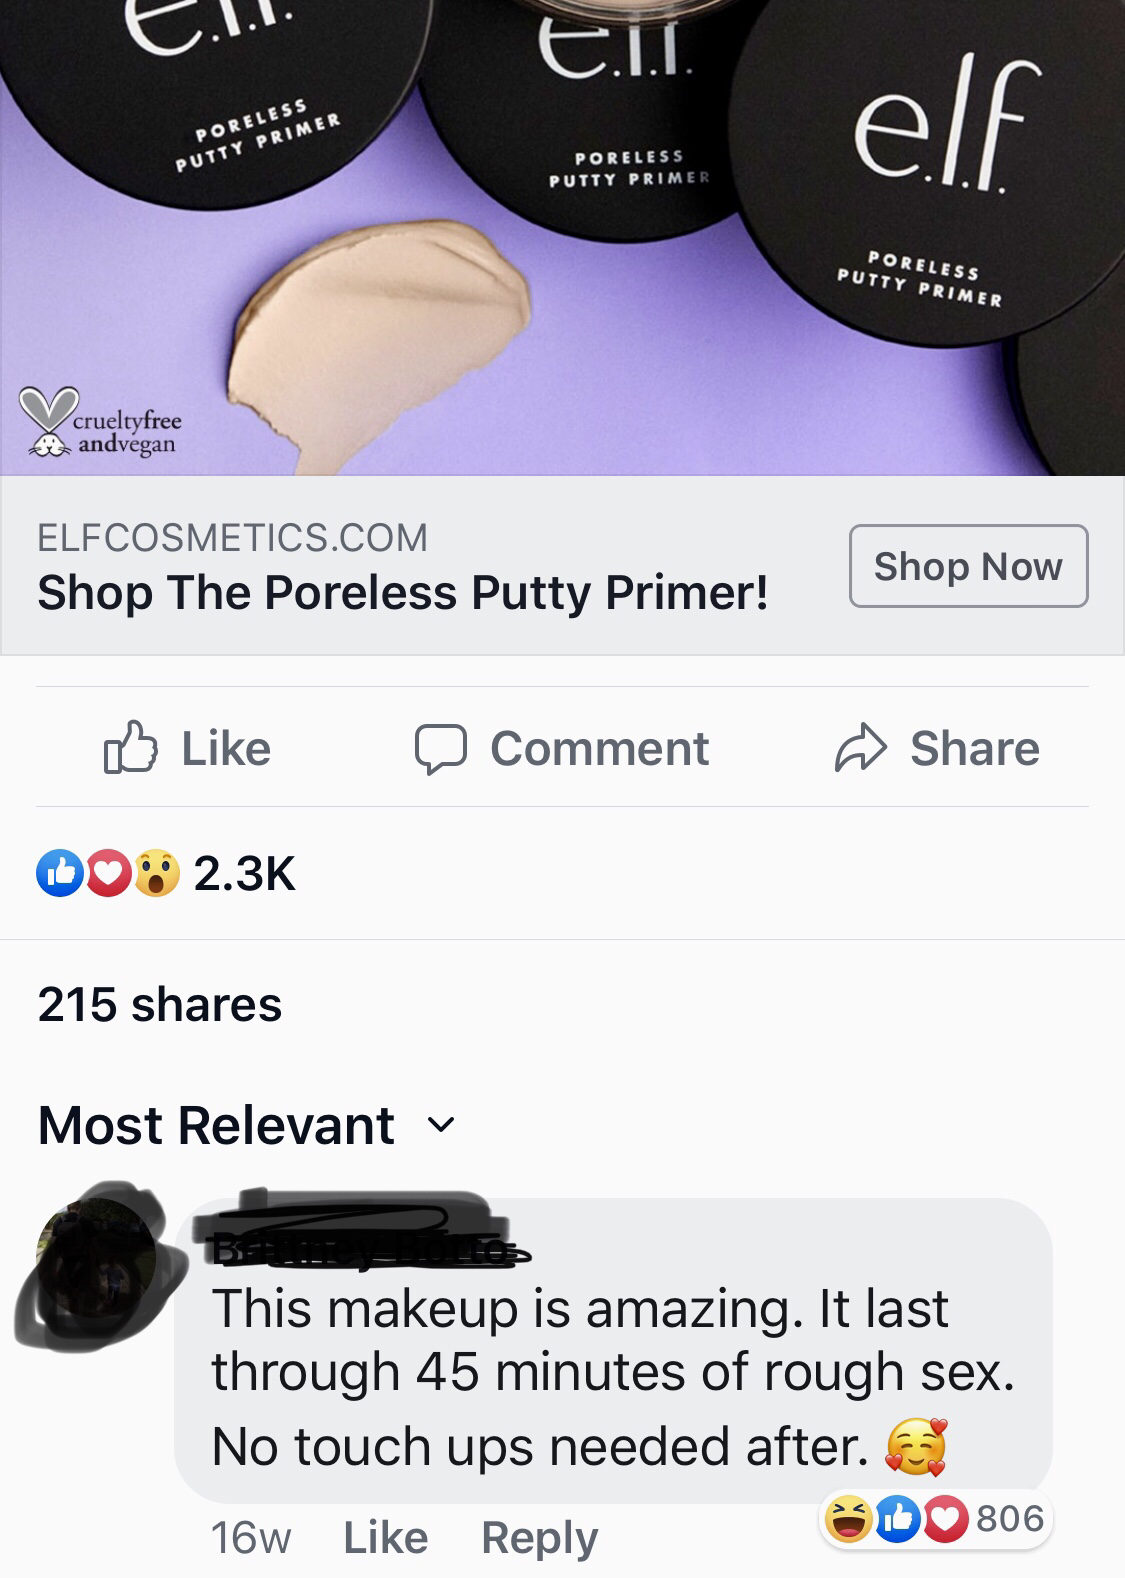 el. Eu curly free anden Elfcosmetics.Com Shop The Poreless Putty Primer! Shop Now Comment 00 215 Most Relevant This makeup is amazing. It last through 45 minutes of rough sex. No touch ups needed after. 16w 00806